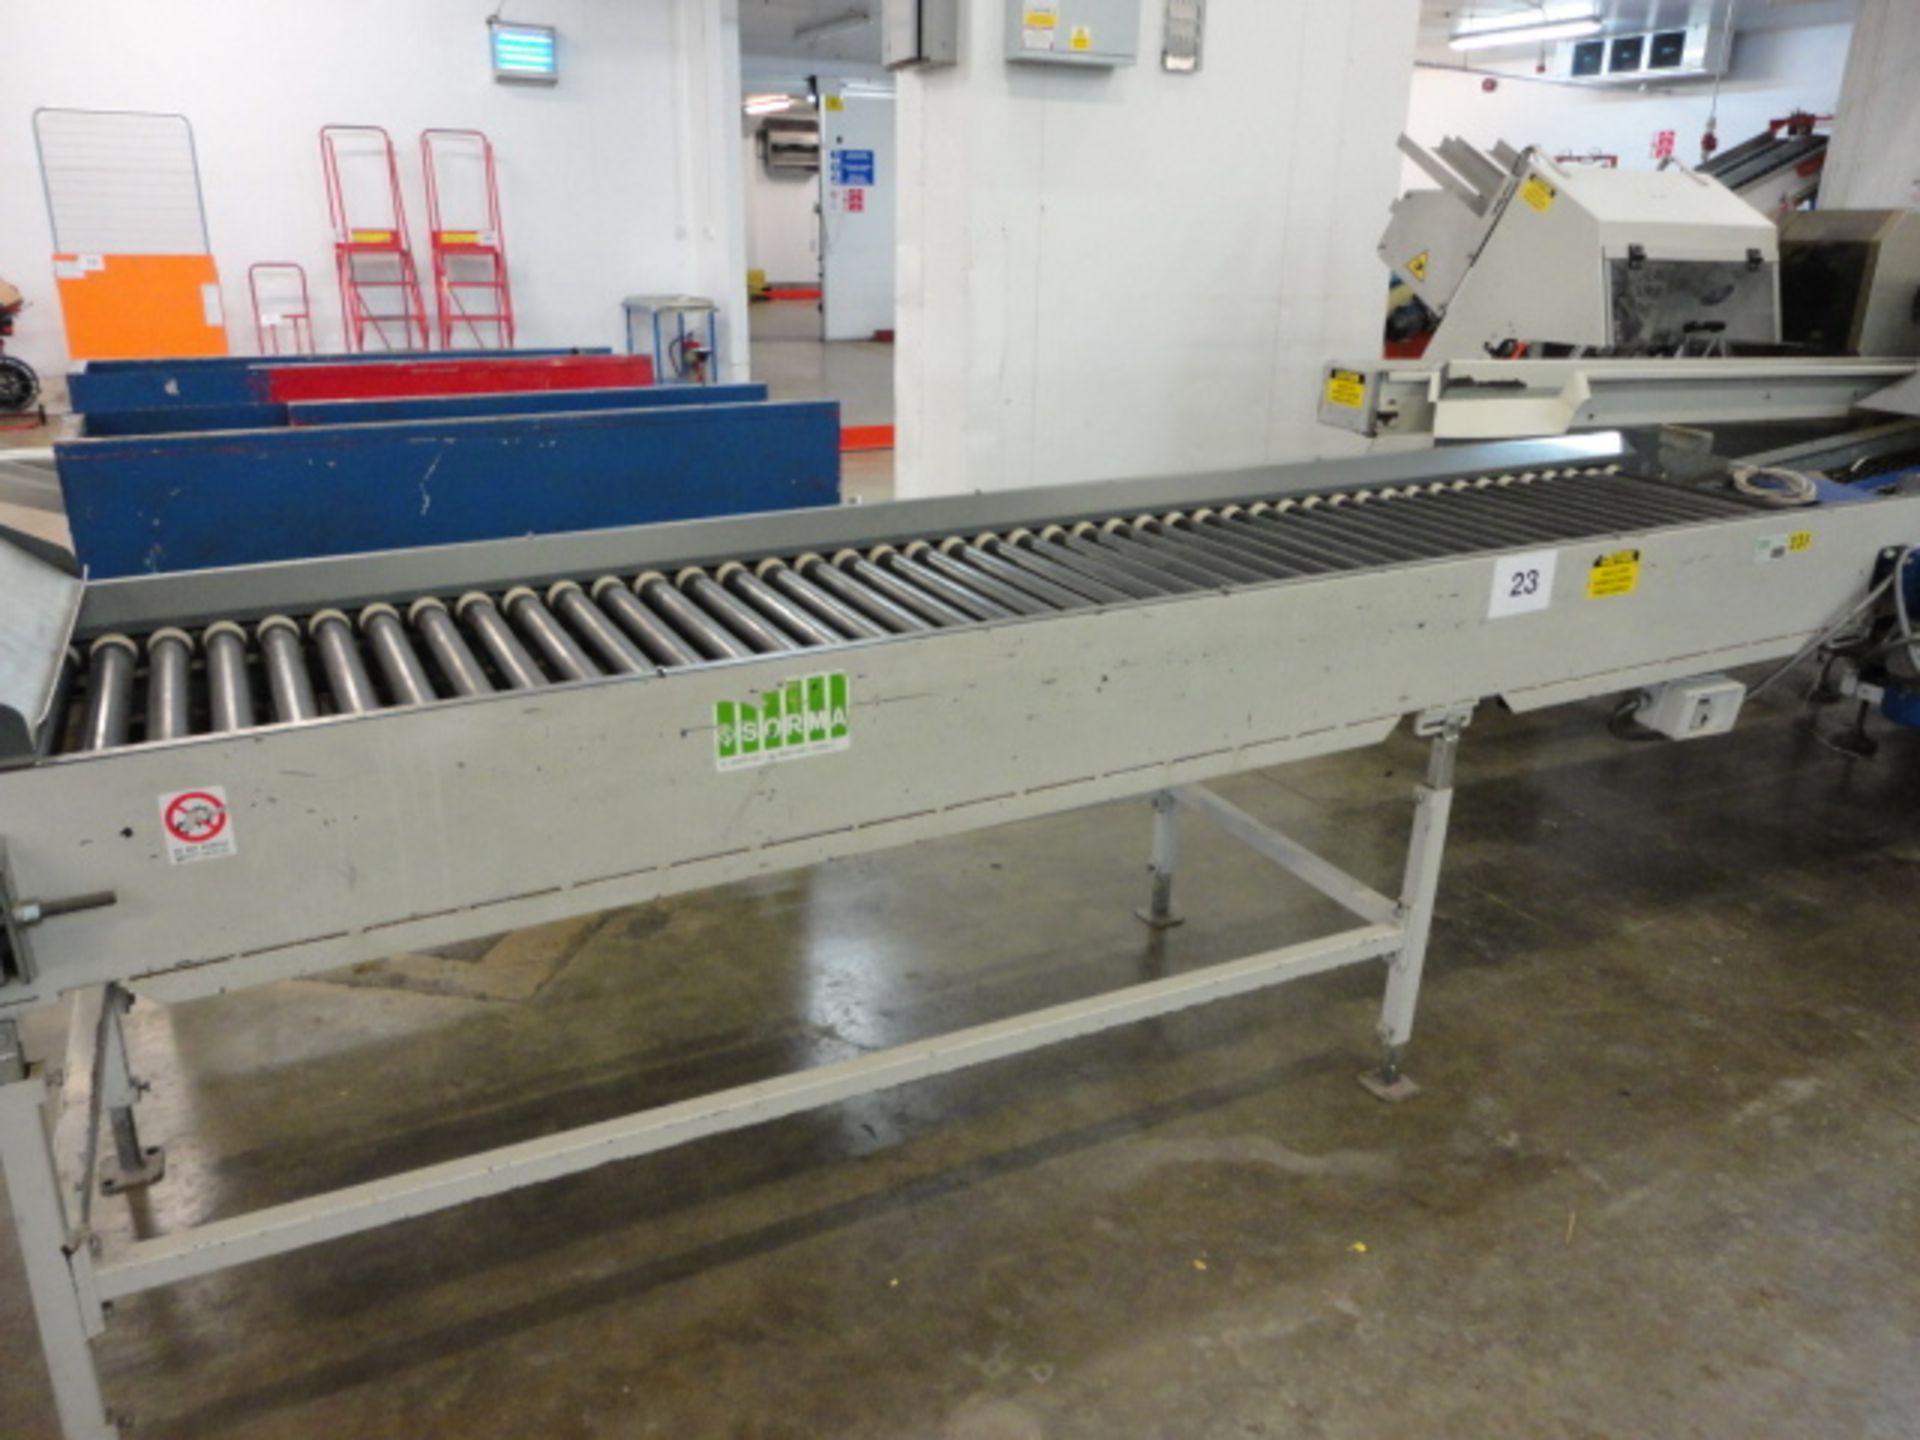 Sorma roller conveyor LIFT OUT CHARGE £20.00